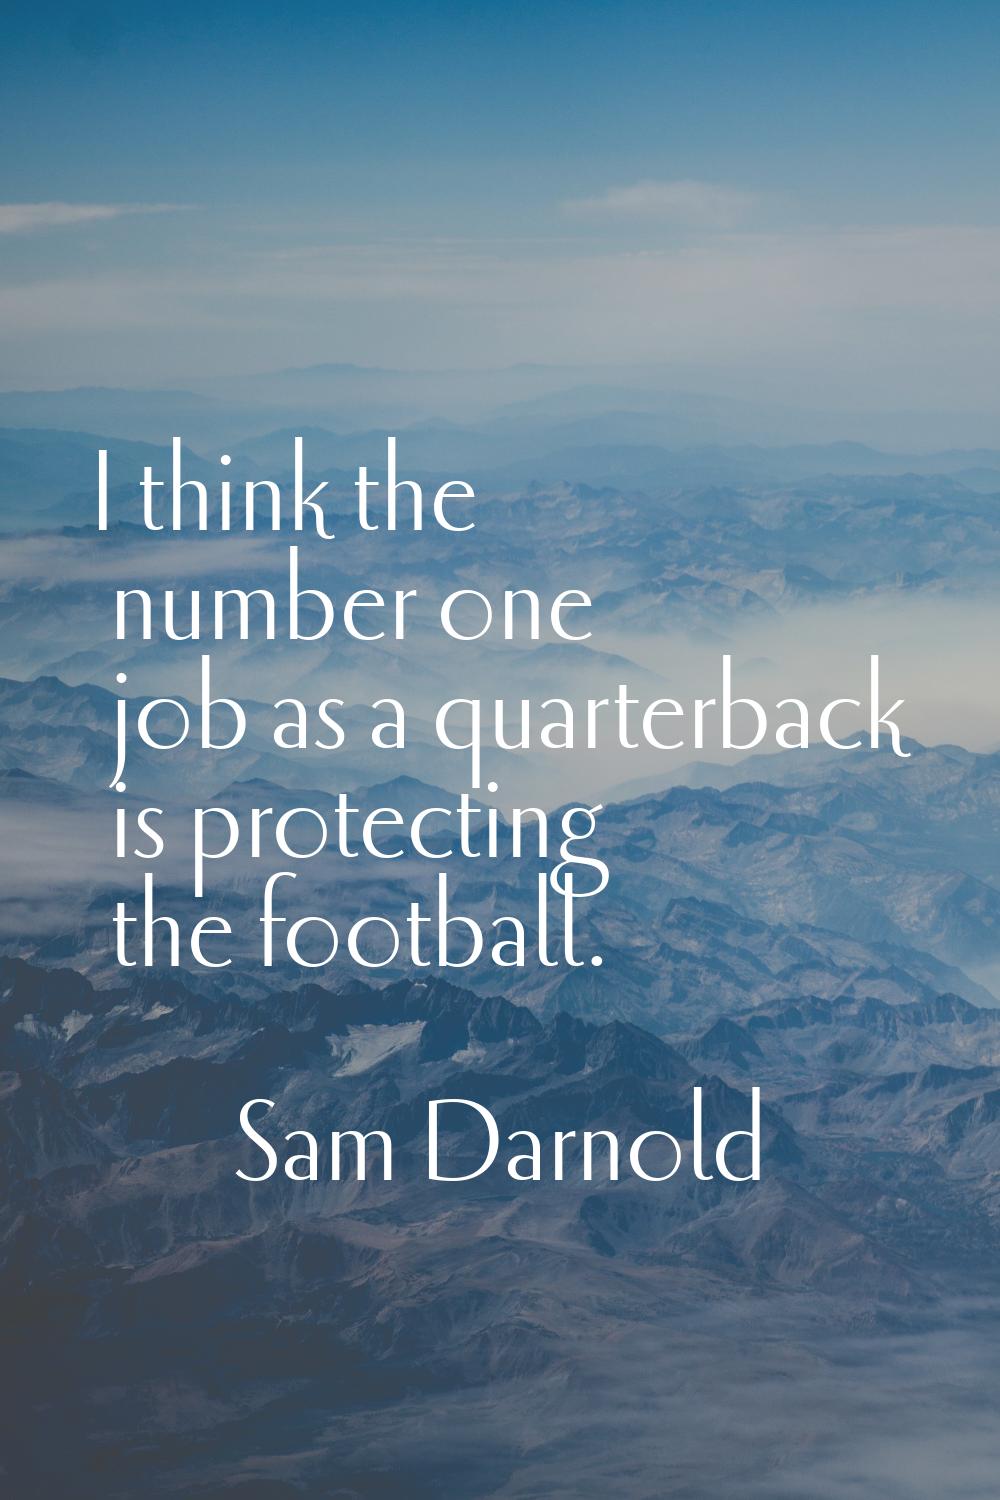 I think the number one job as a quarterback is protecting the football.